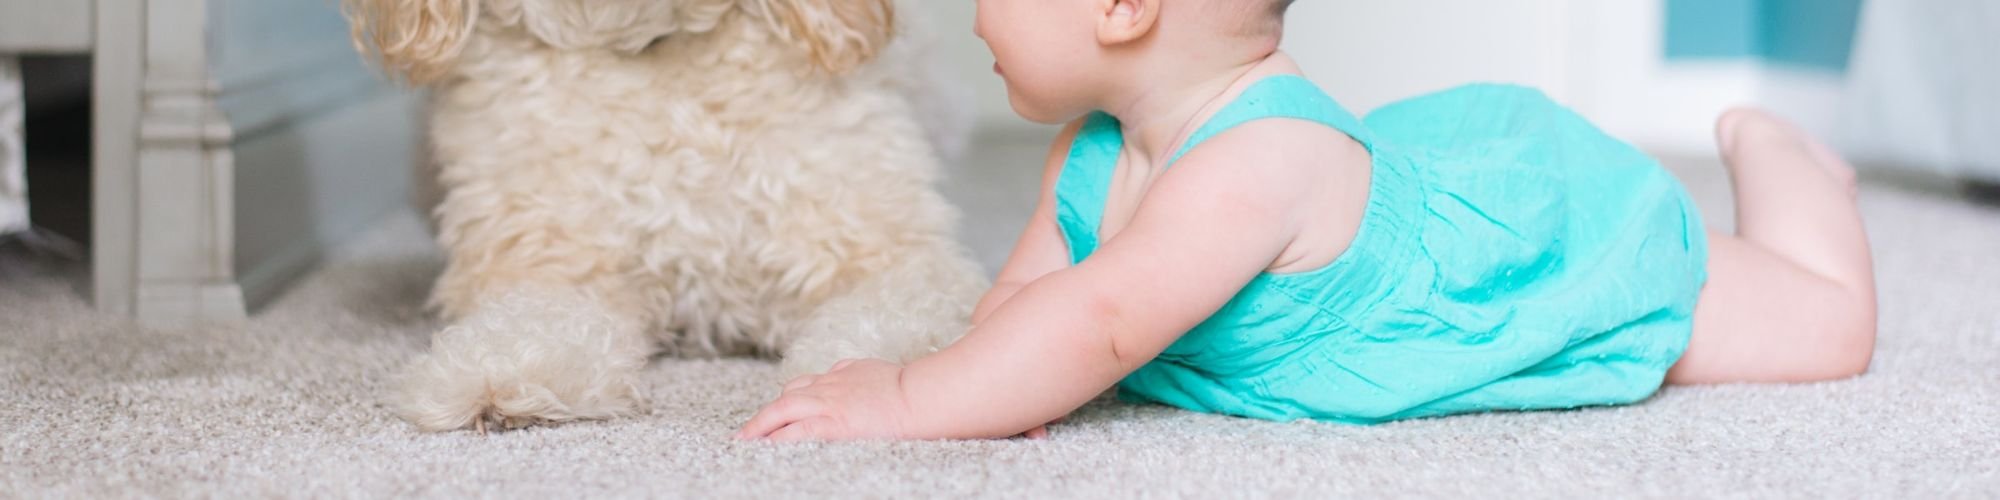 Baby and dog playing on light beige carpet flooring.